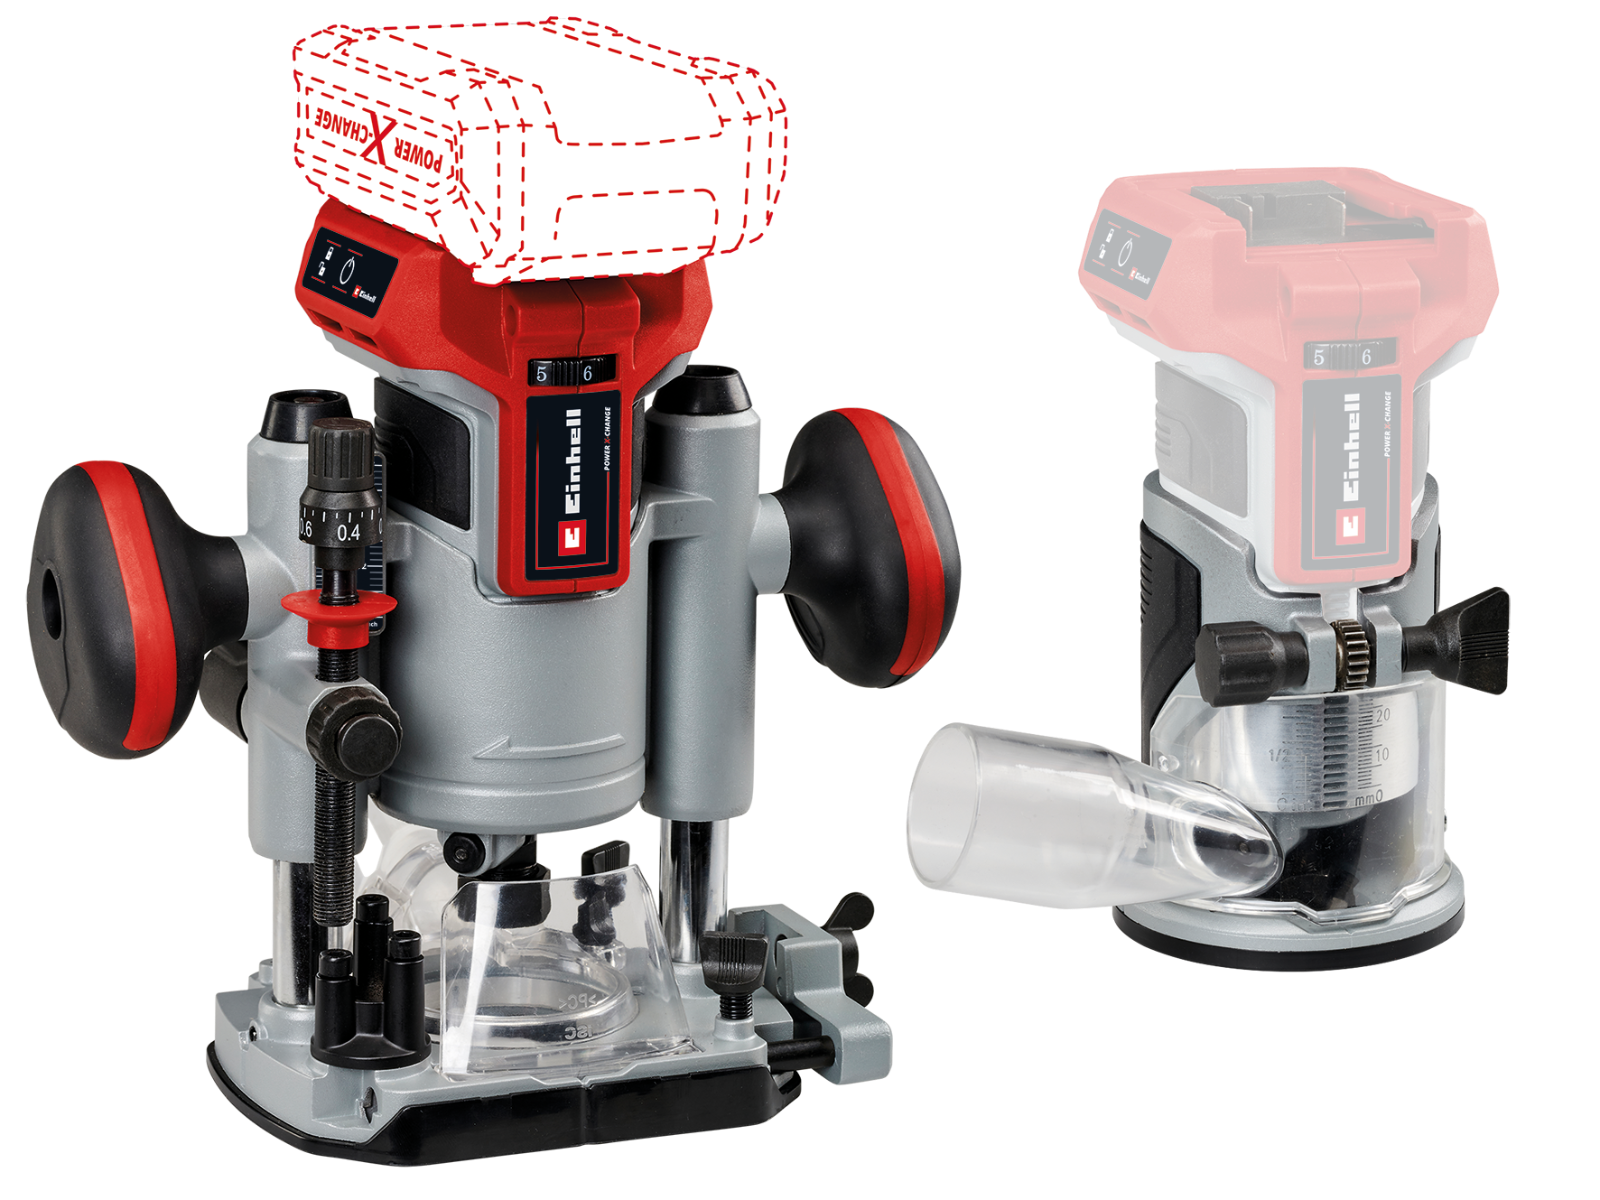 TP-RO 18 set Li BL - 18V Cordless Compact Router with Fixed and Plunge Base